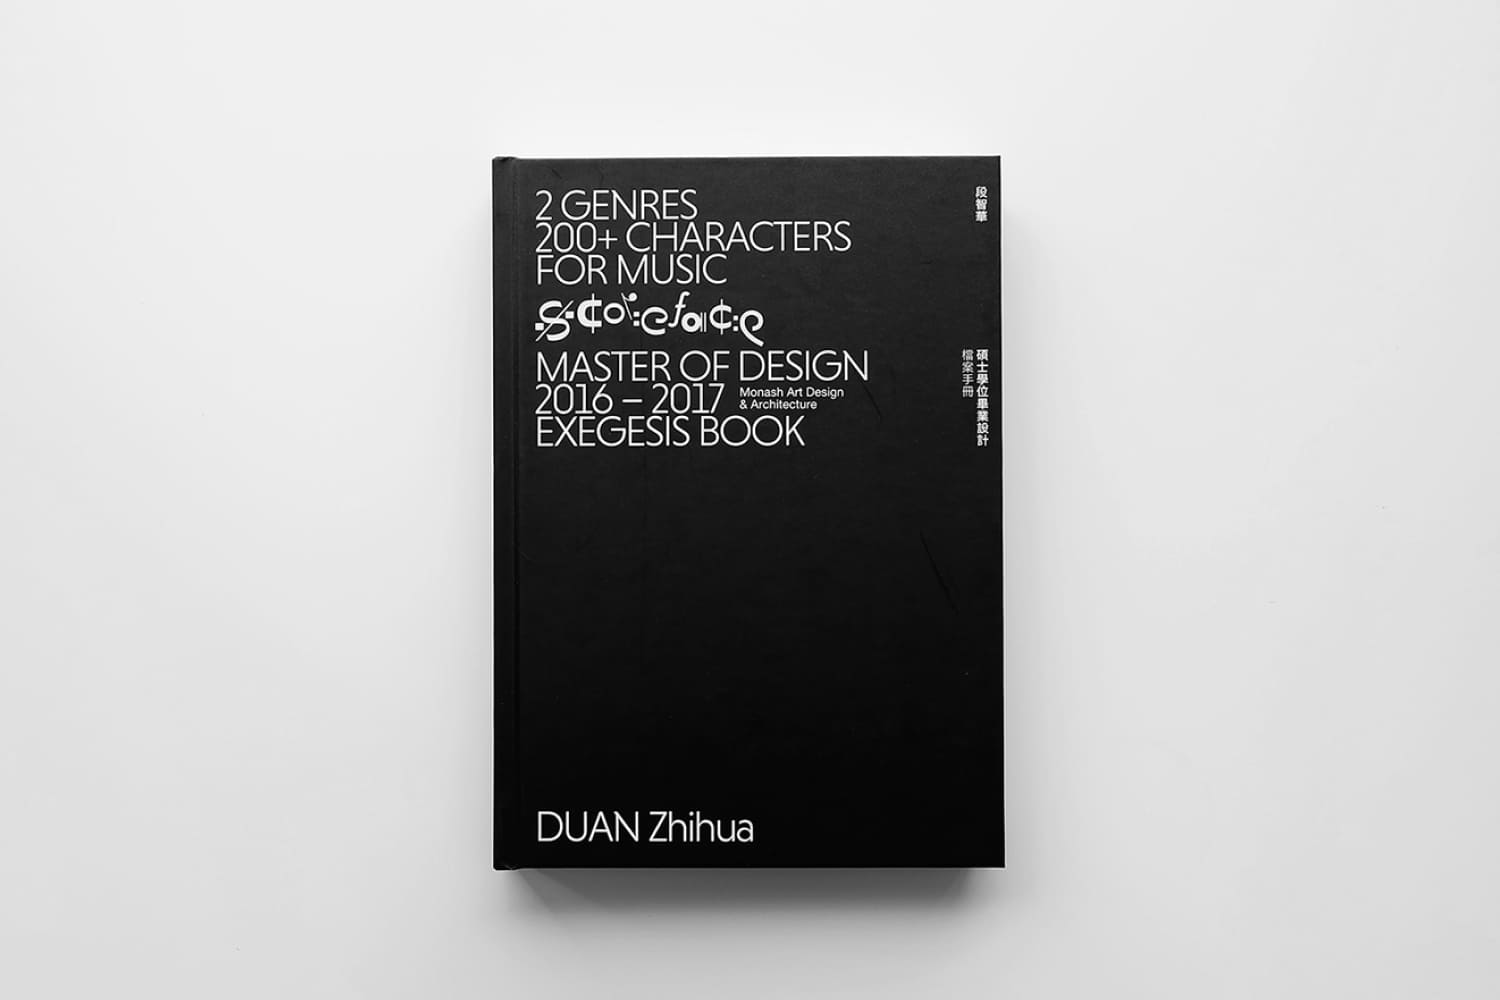 Black book with white text on the cover.